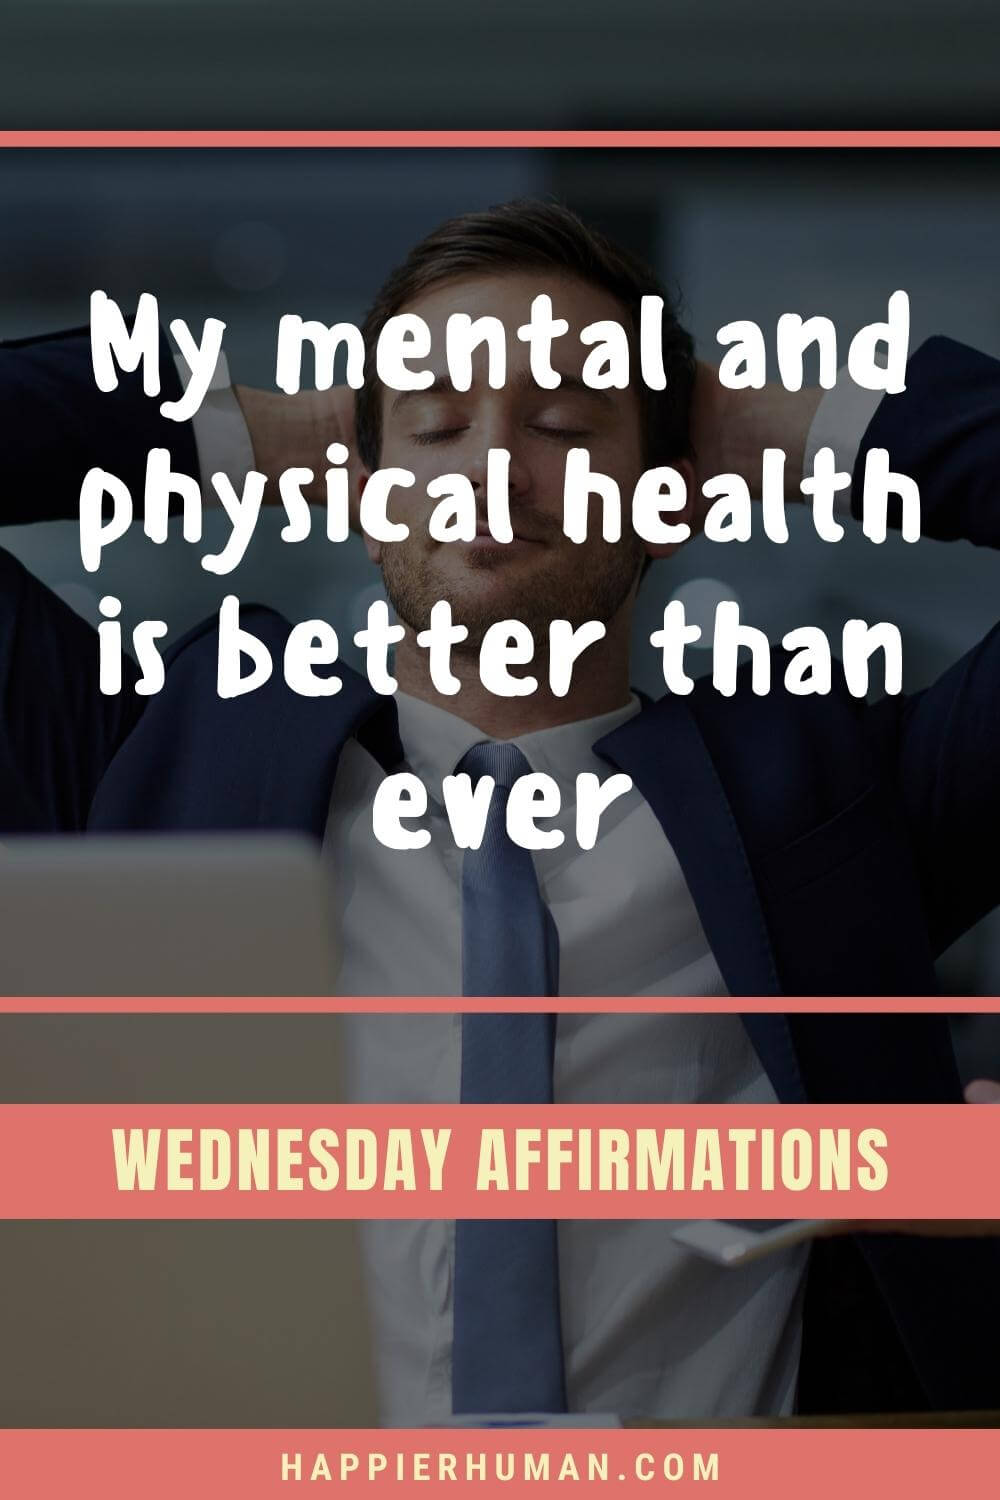 Wednesday Affirmations - My mental and physical health is better than ever | thursday affirmations for work | wellness wednesday affirmations | wednesday morning affirmations images